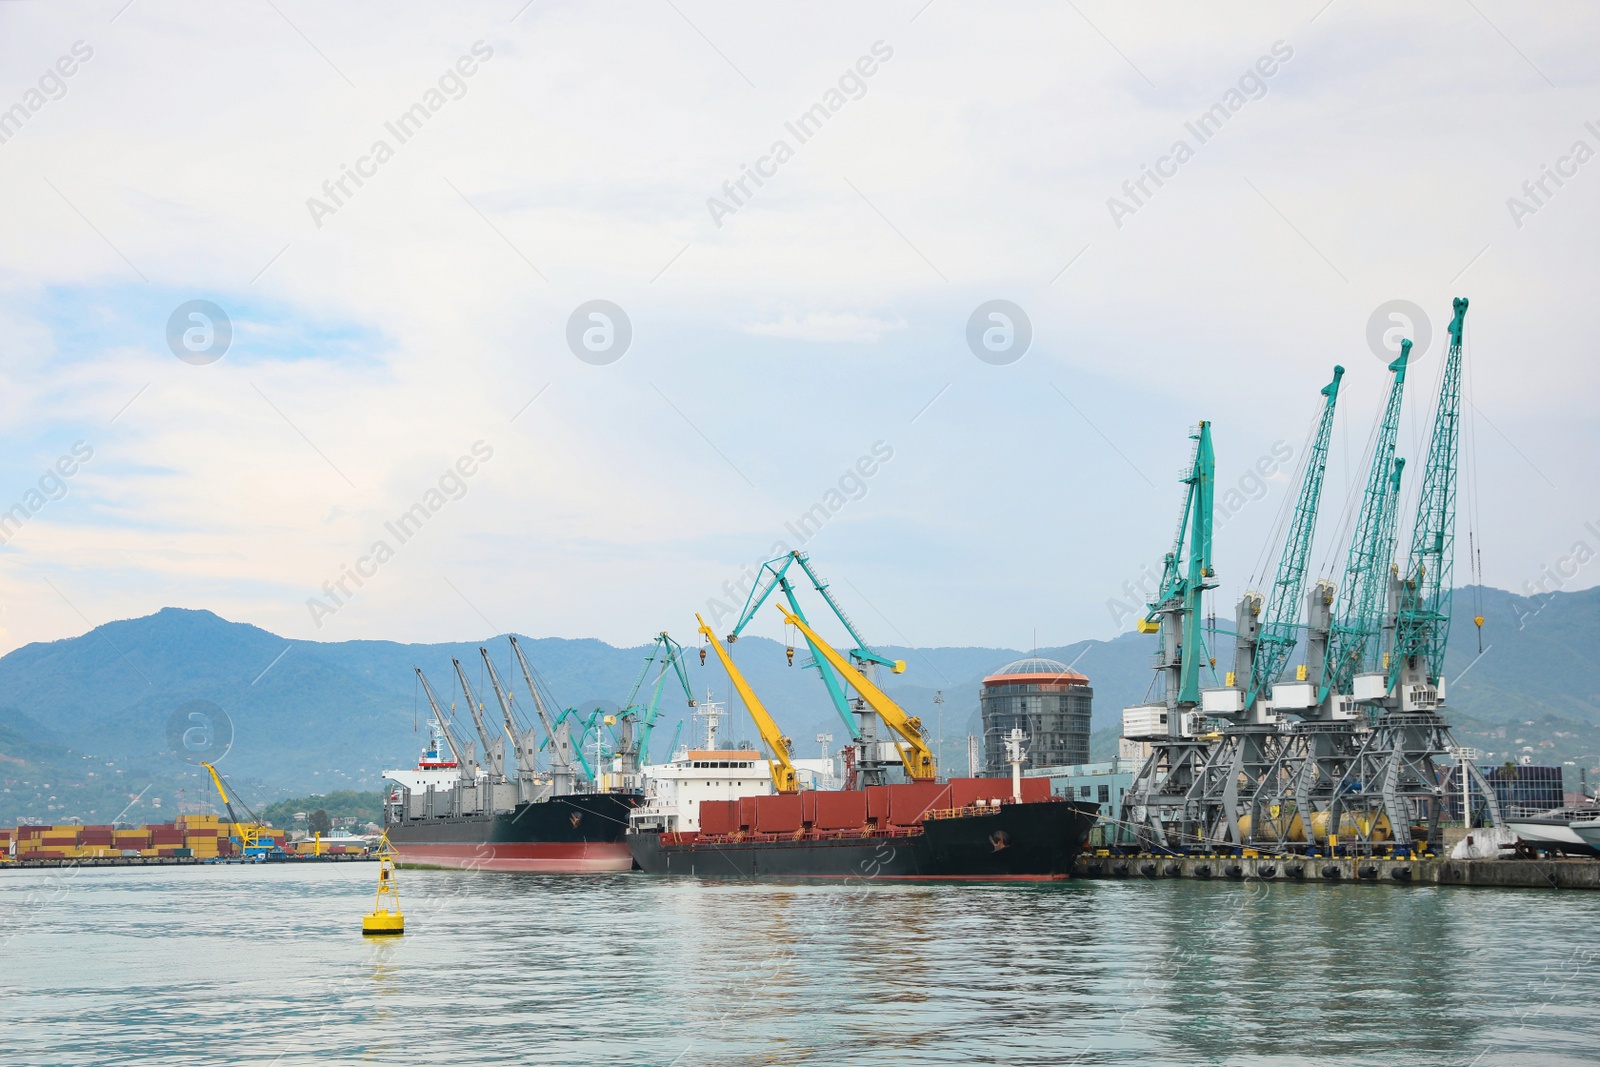 Photo of Shipyard with cranes and vessels on water